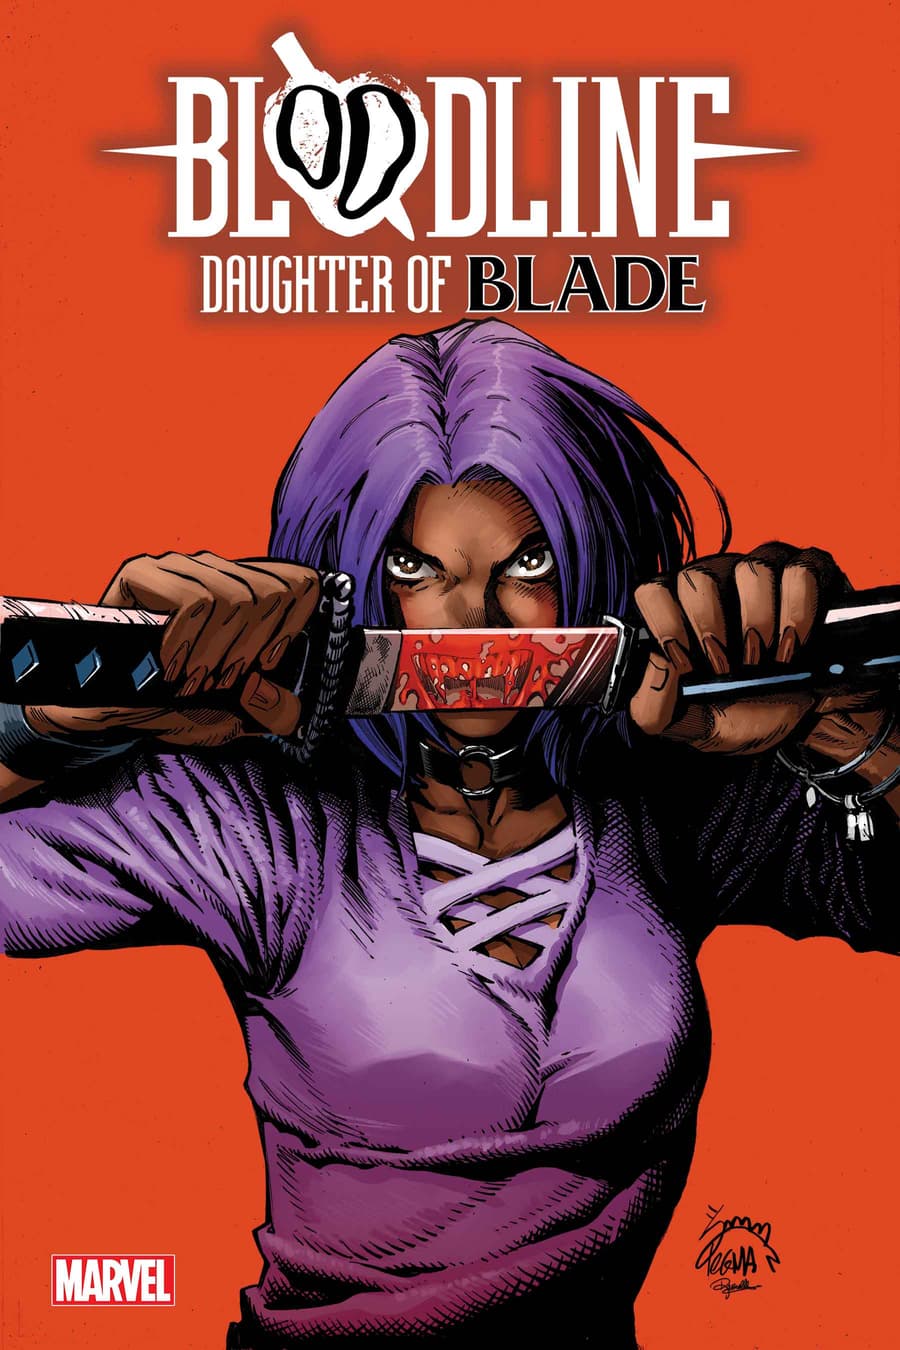 BLOODLINE: DAUGHTER OF BLADE #1 Cover A by Ryan Stegman